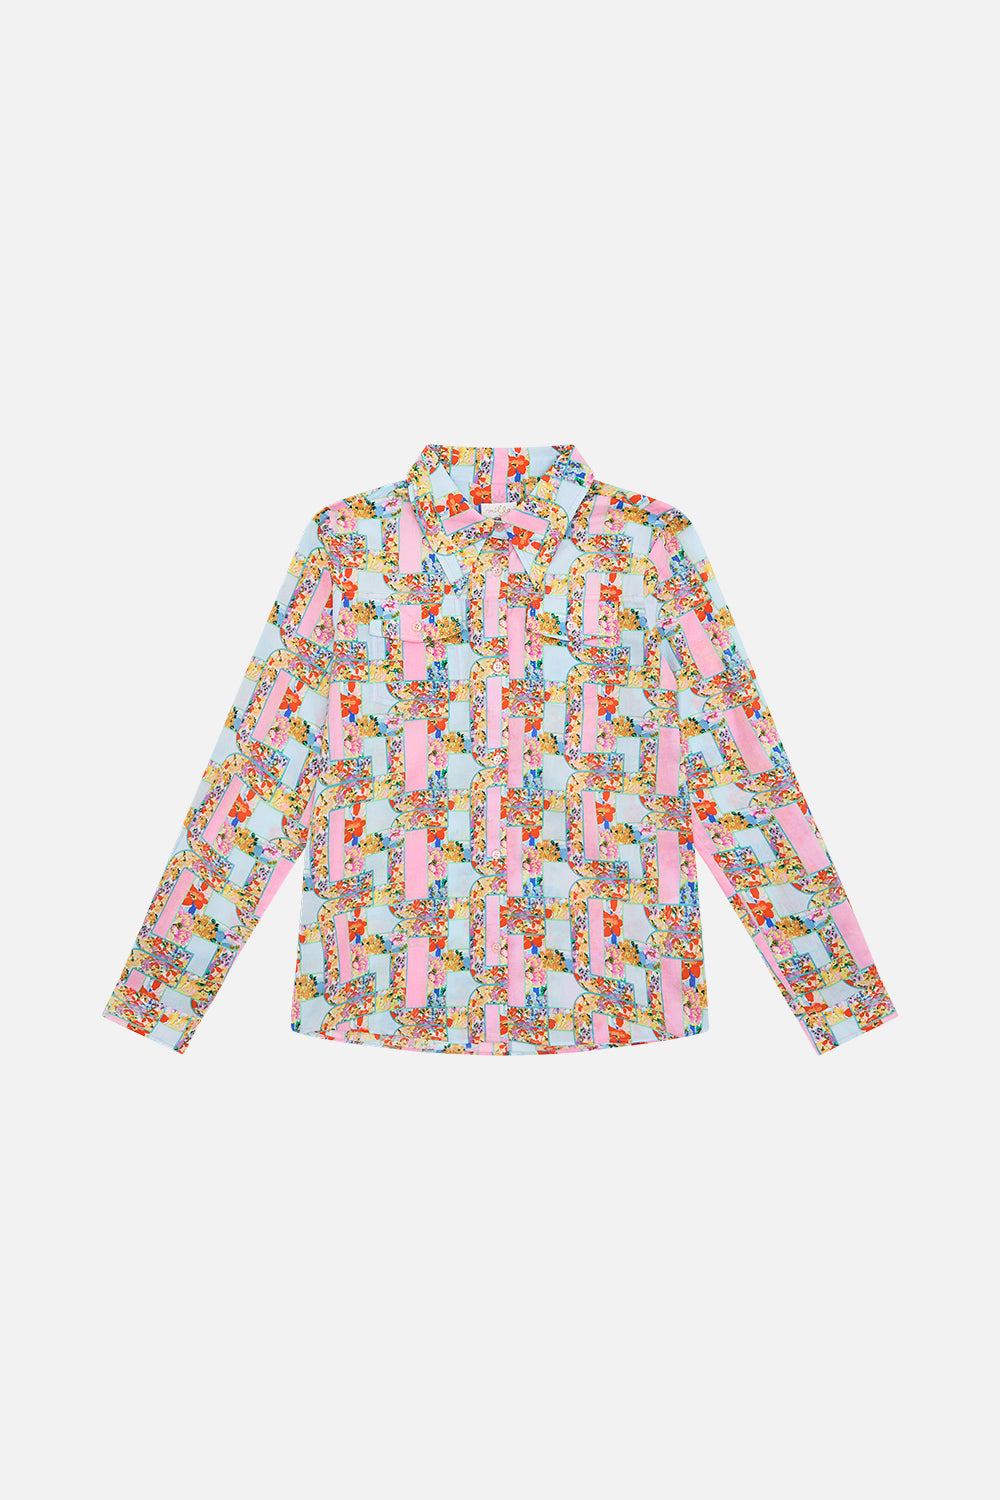 Product view of MILLA BY CAMILLA kids button shirt in An Italian Welcome print